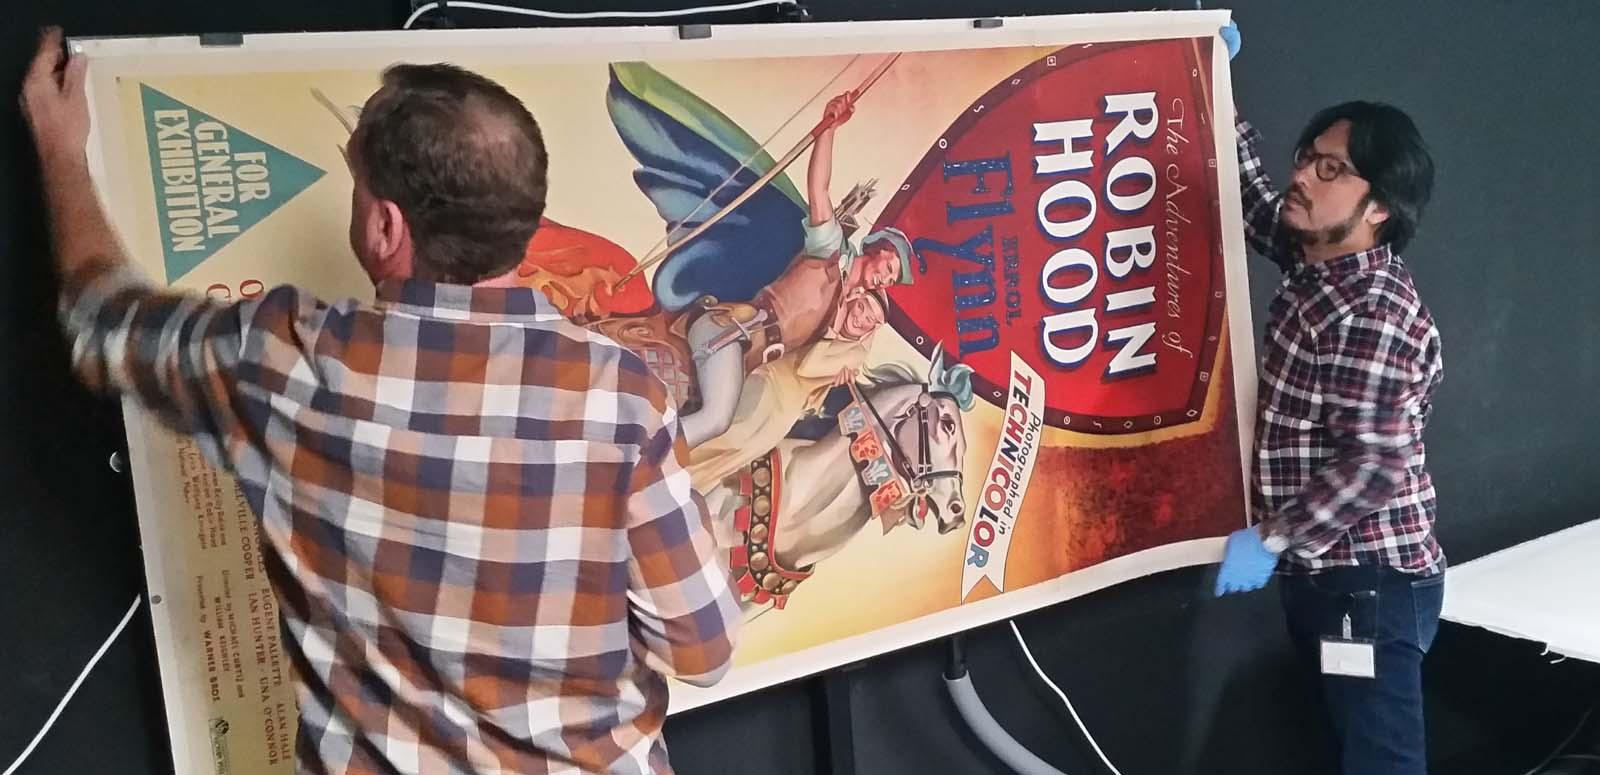 Two NFSA staff members carrying a poster for the film The Adventures of Robin Hood, starring Errol Flynn